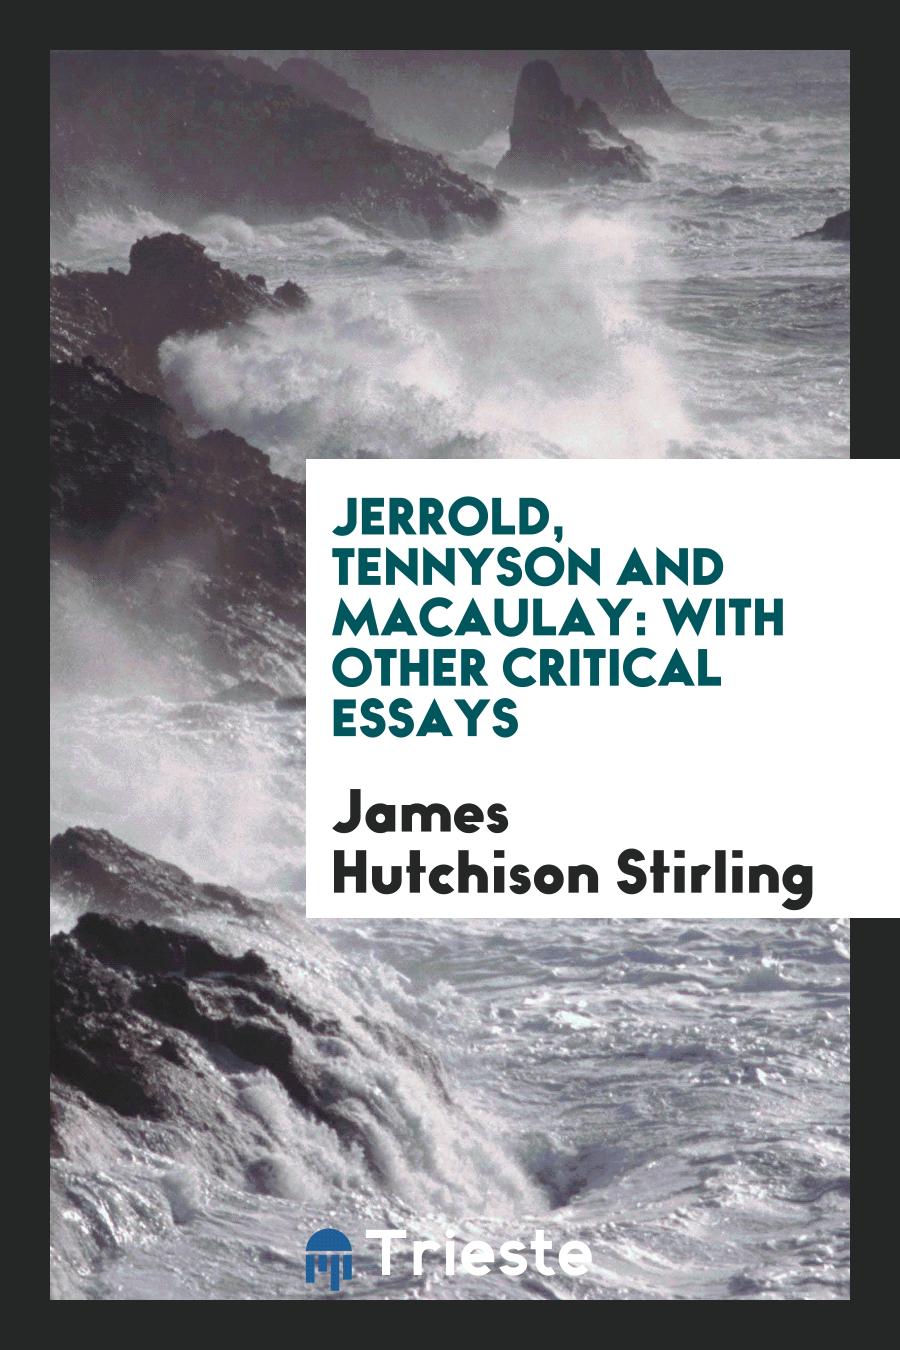 Jerrold, Tennyson and Macaulay: With Other Critical Essays